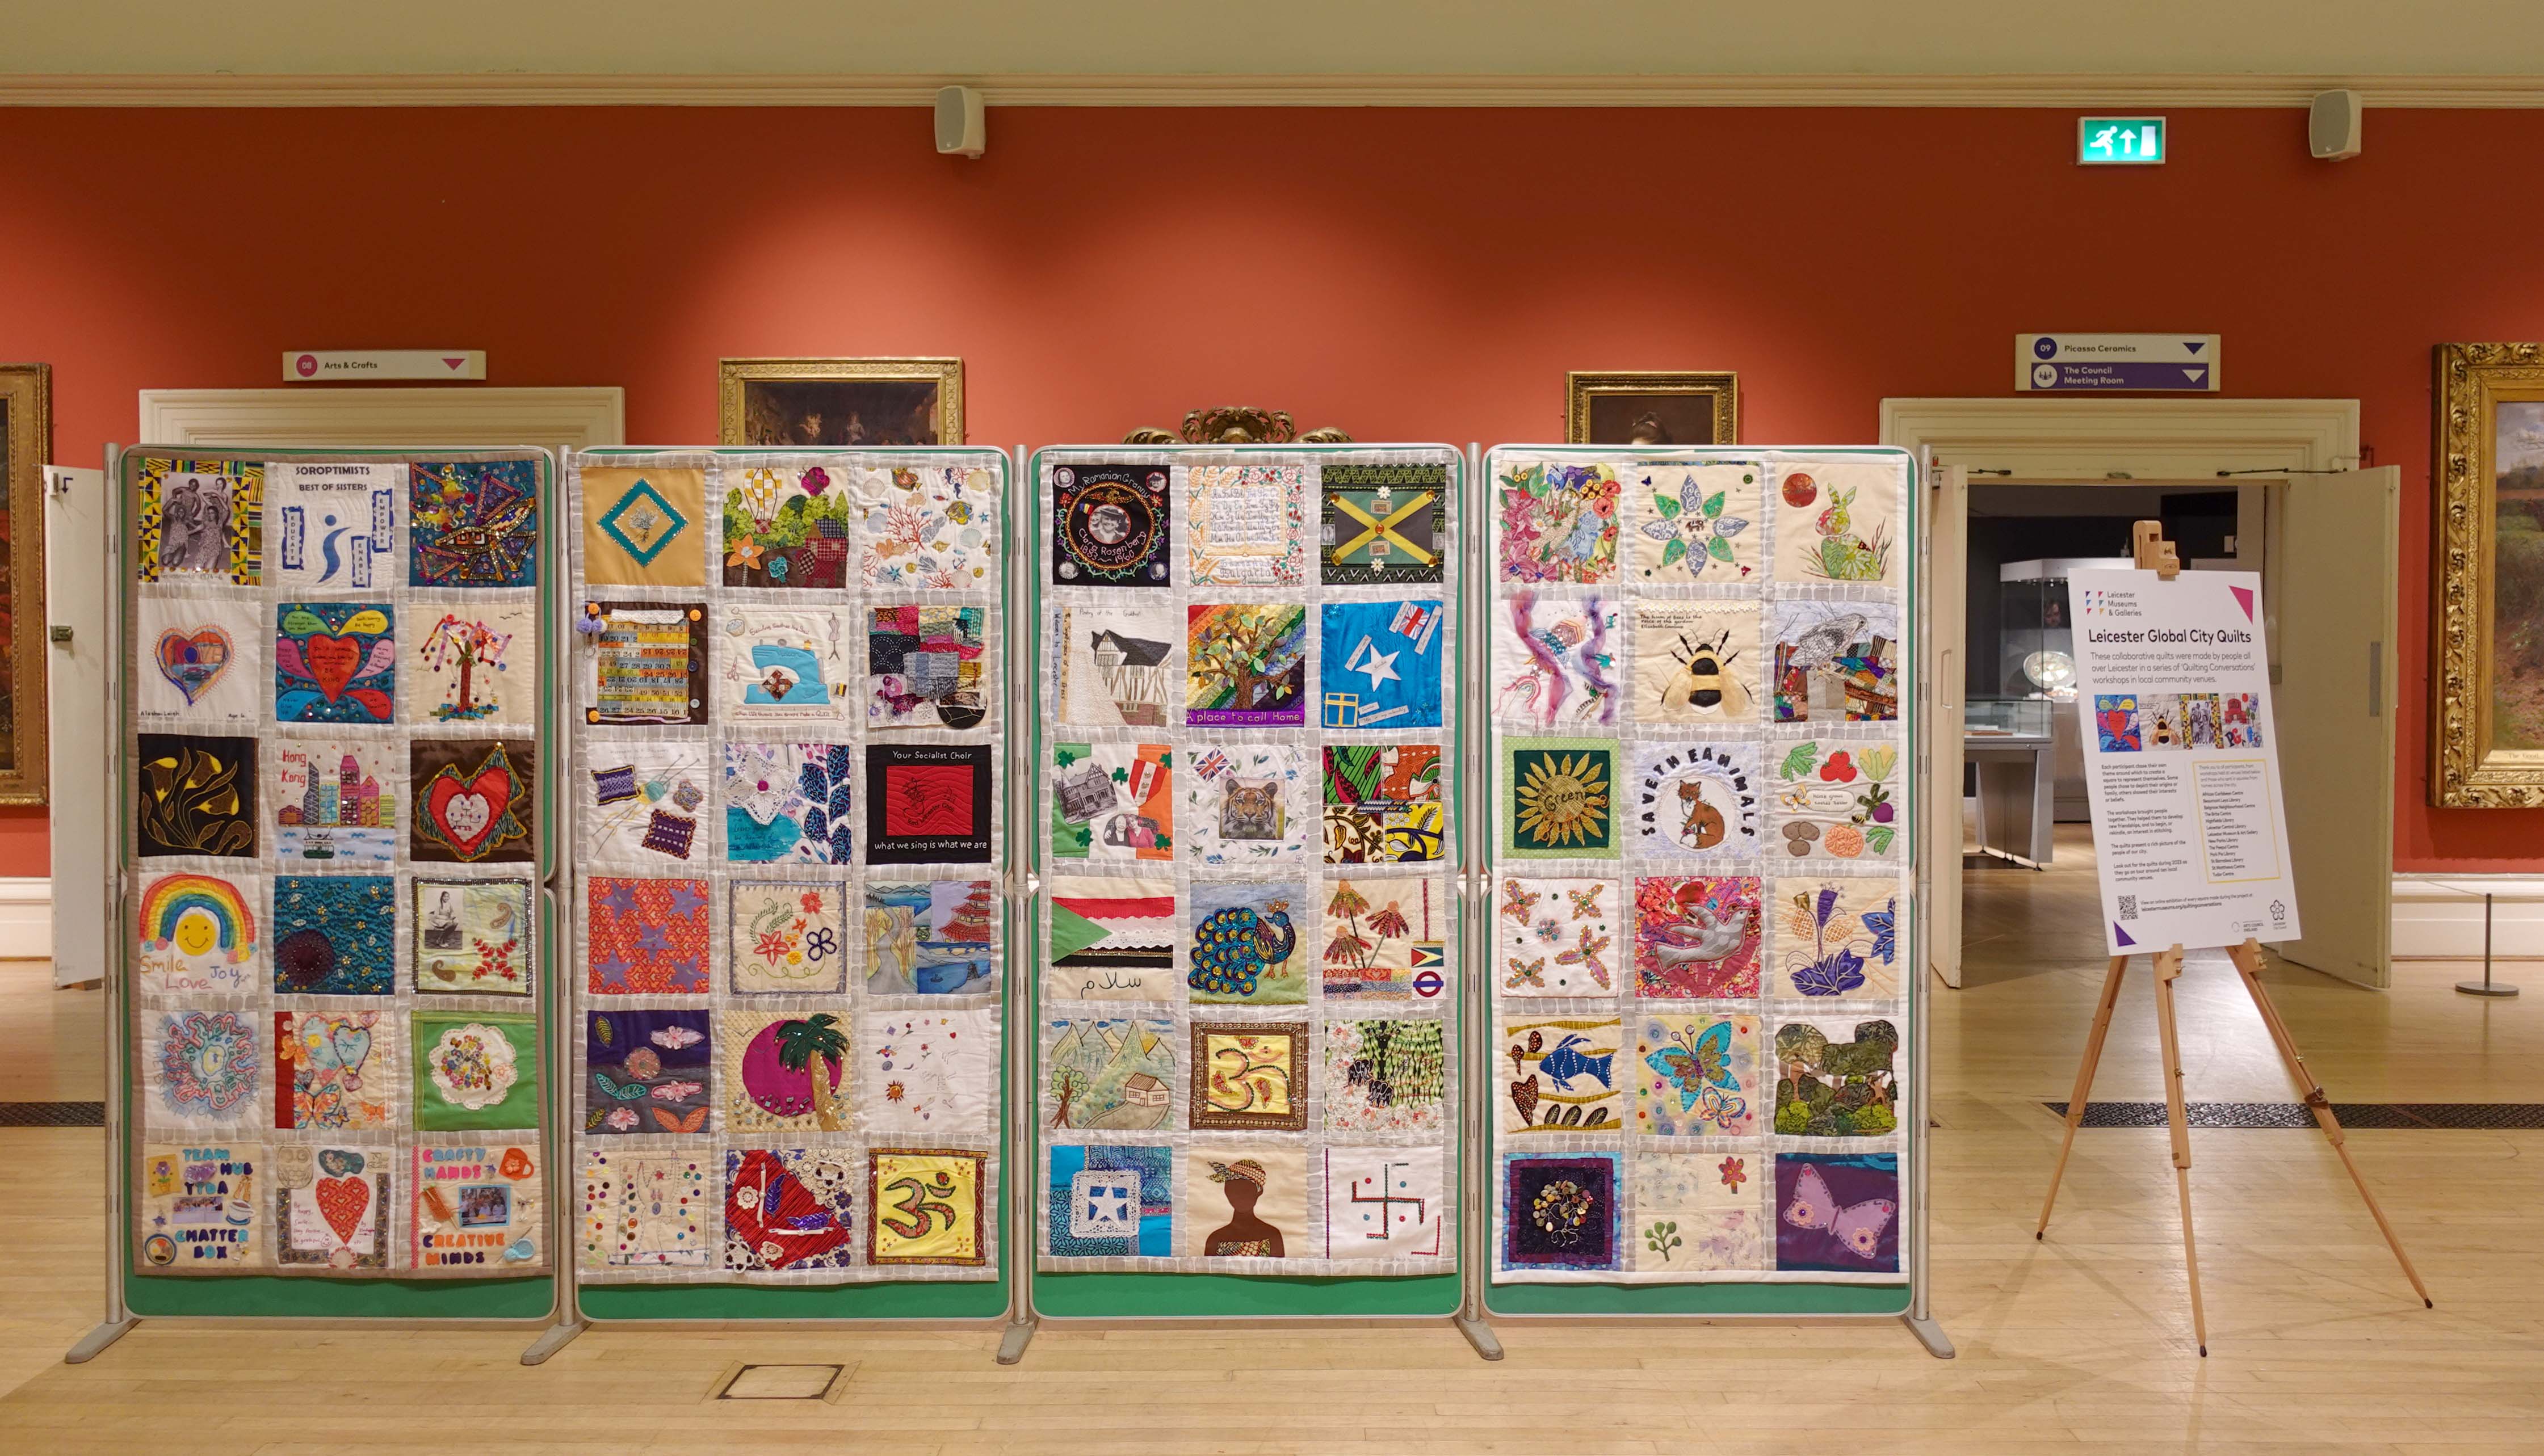 The Global City Quilts on display at Leicester Museum & Art Gallery